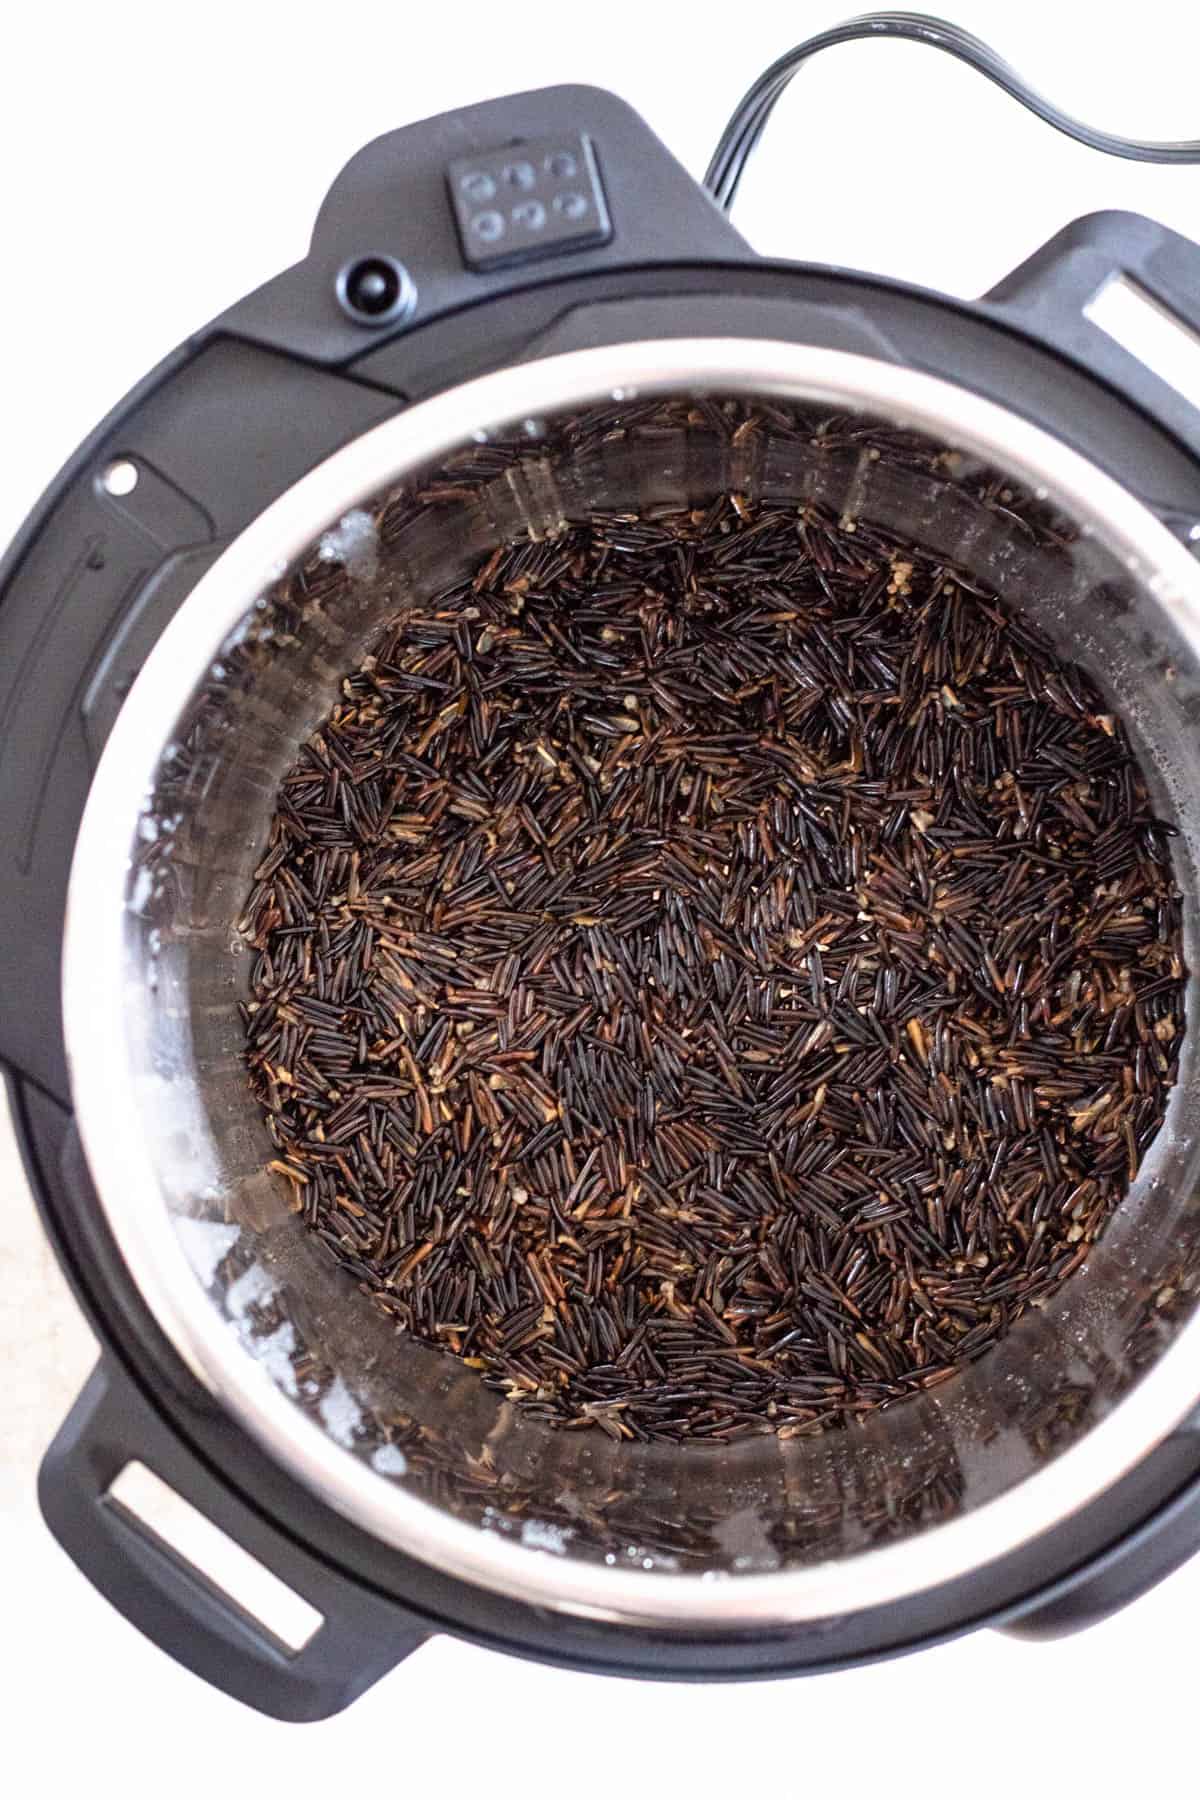 How To Cook Wild Rice In Electric Pressure Cooker